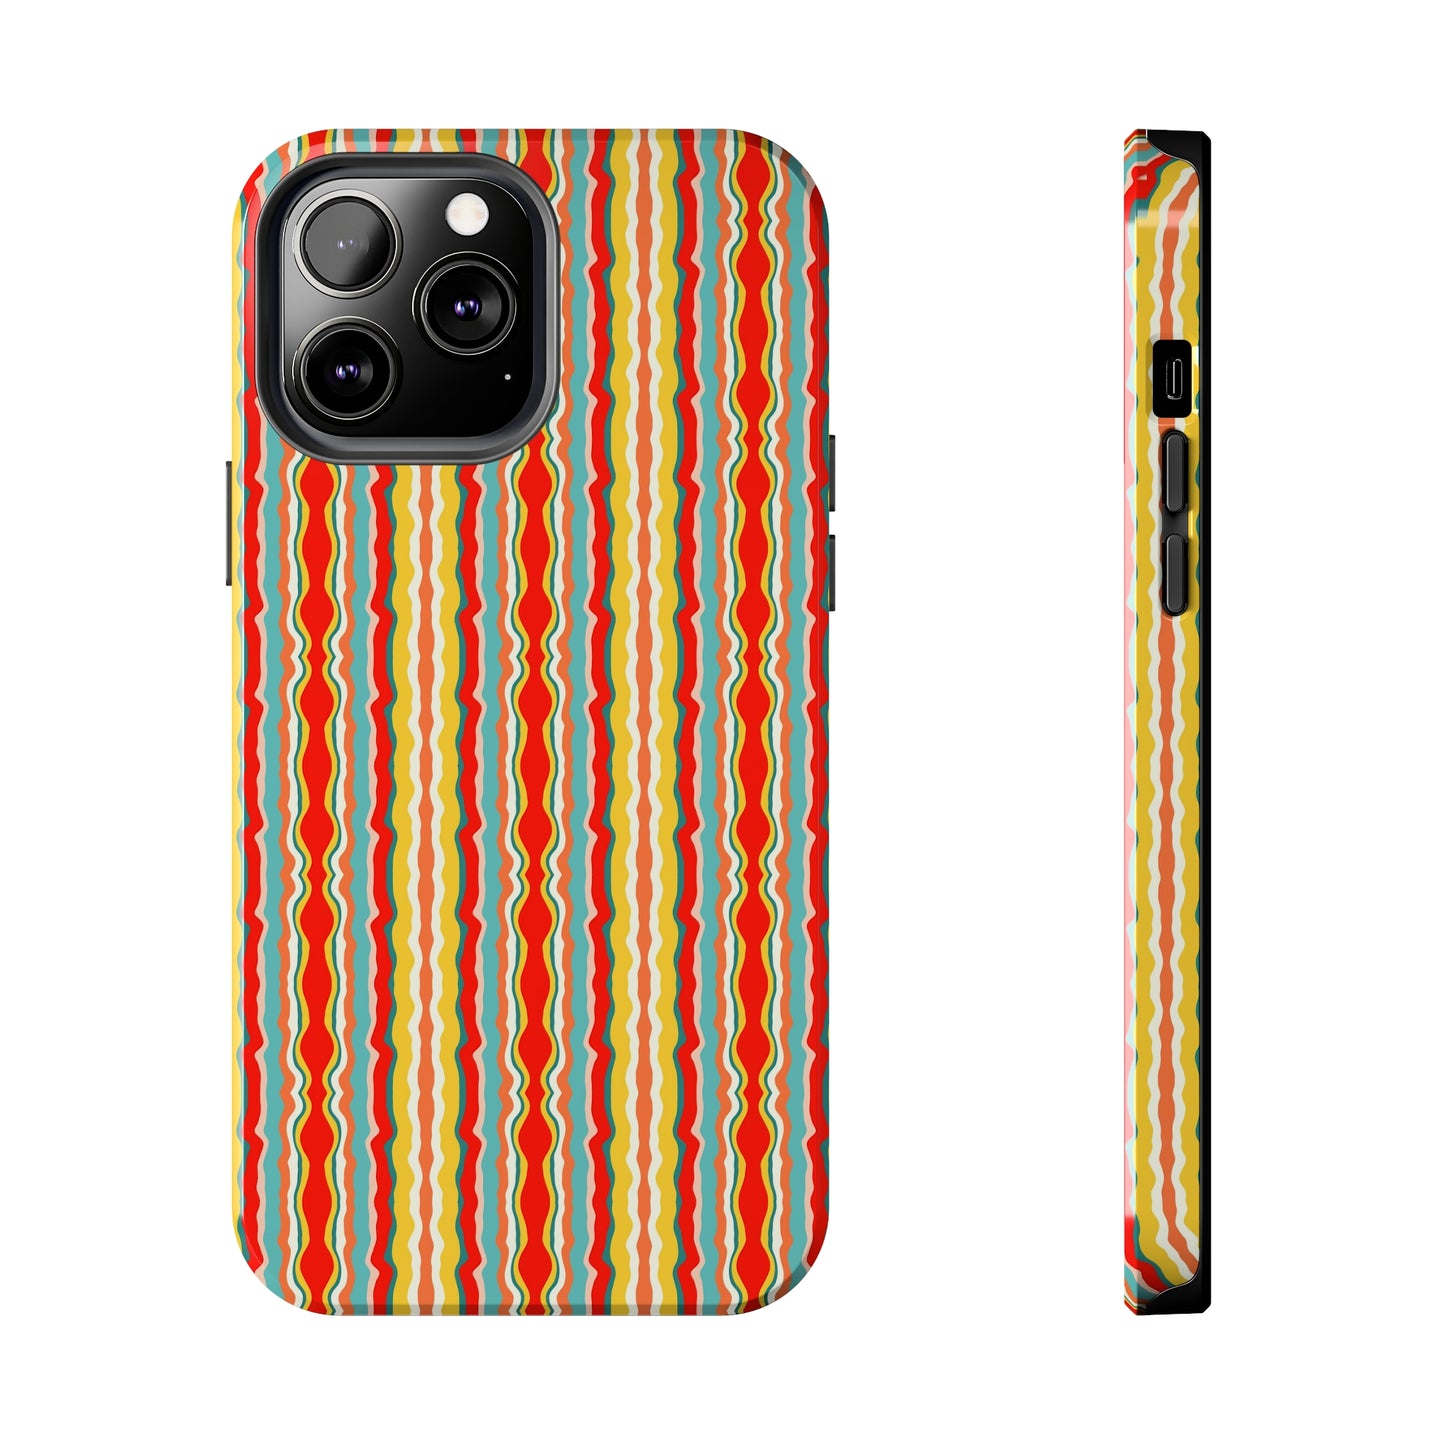 Groovy Stripes Tough Phone Cases